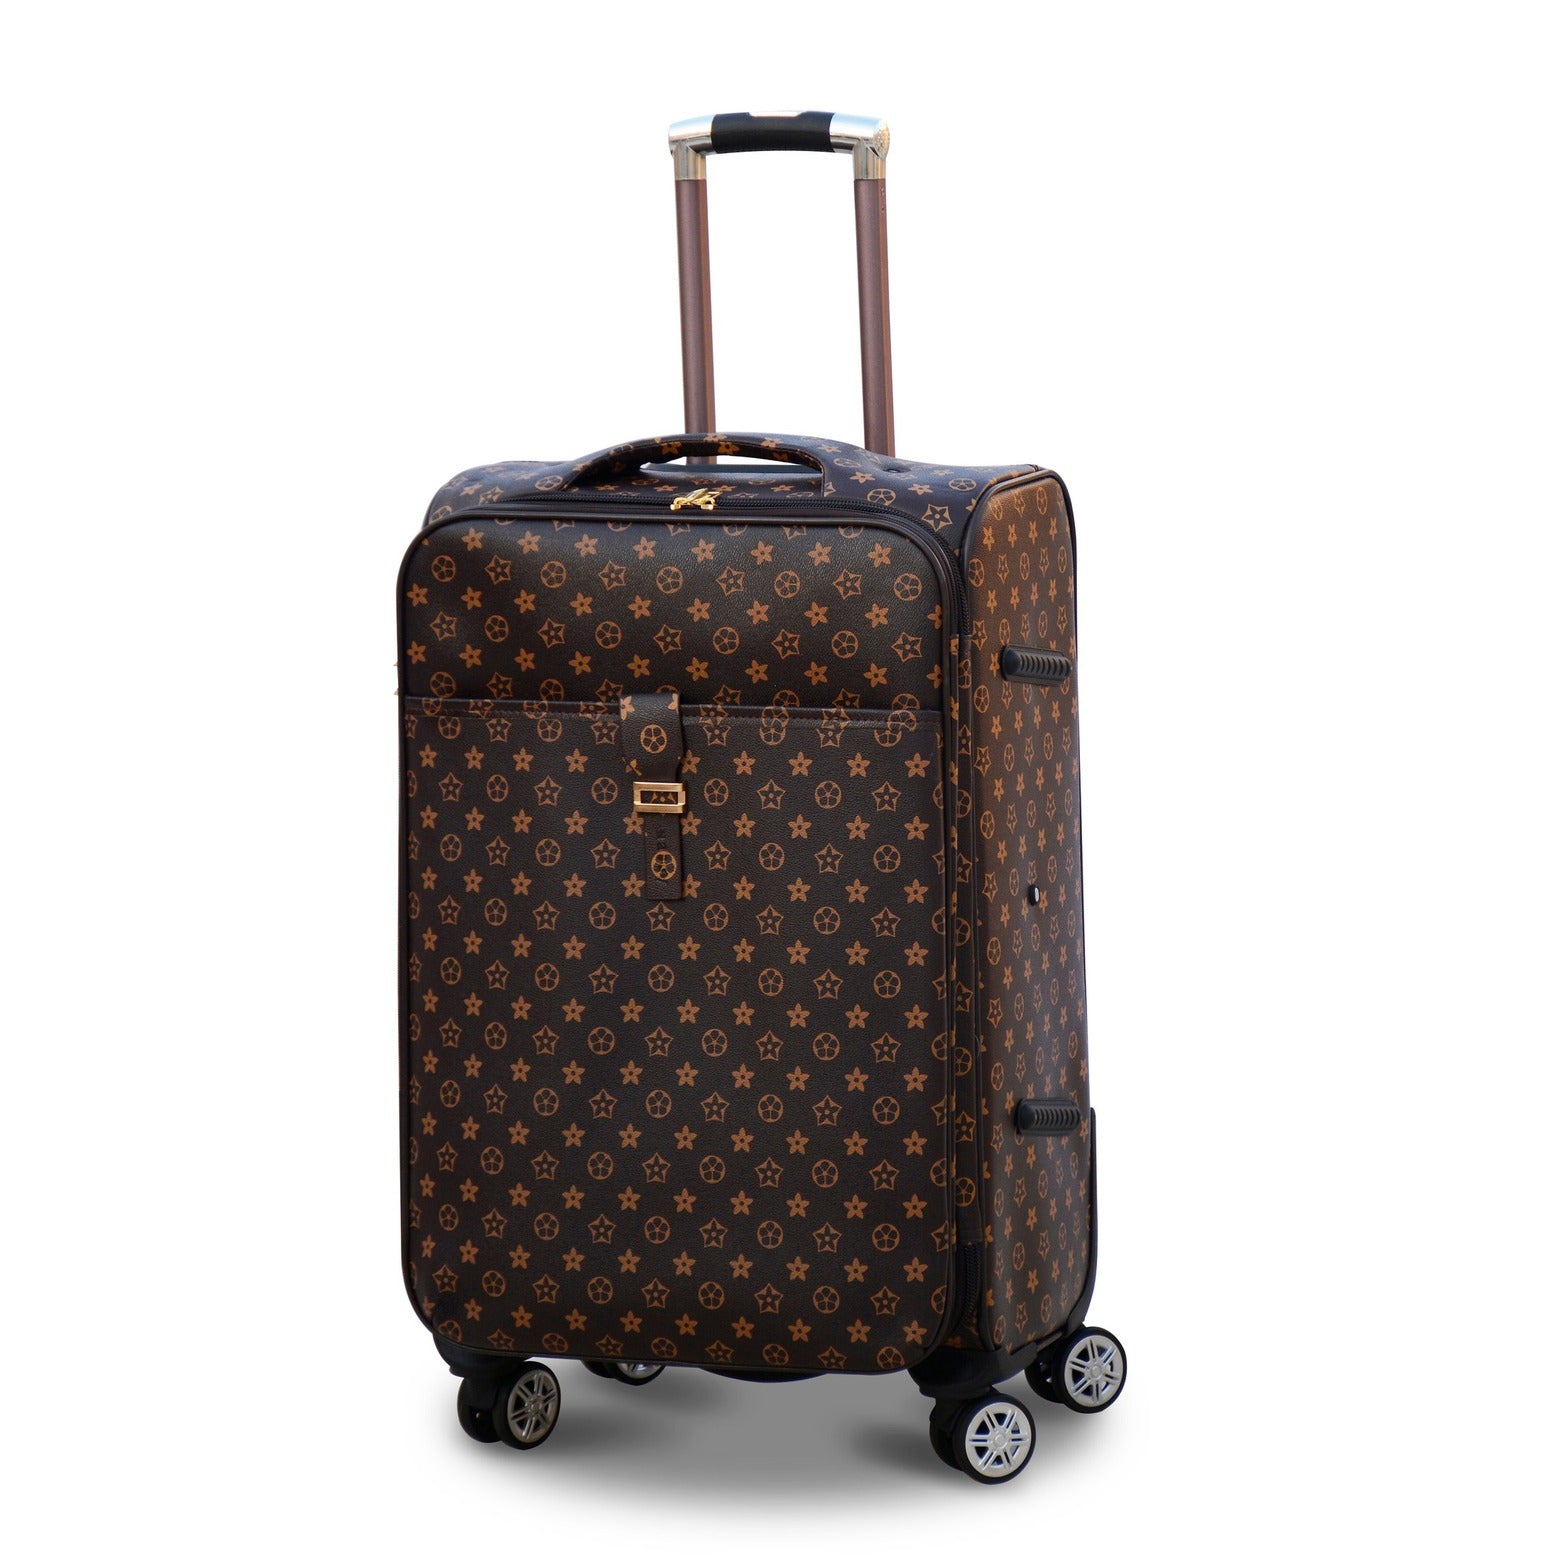 24" Brown Colour LVR PU Leather Luggage Lightweight Soft Material Trolley Bag Zaappy.com